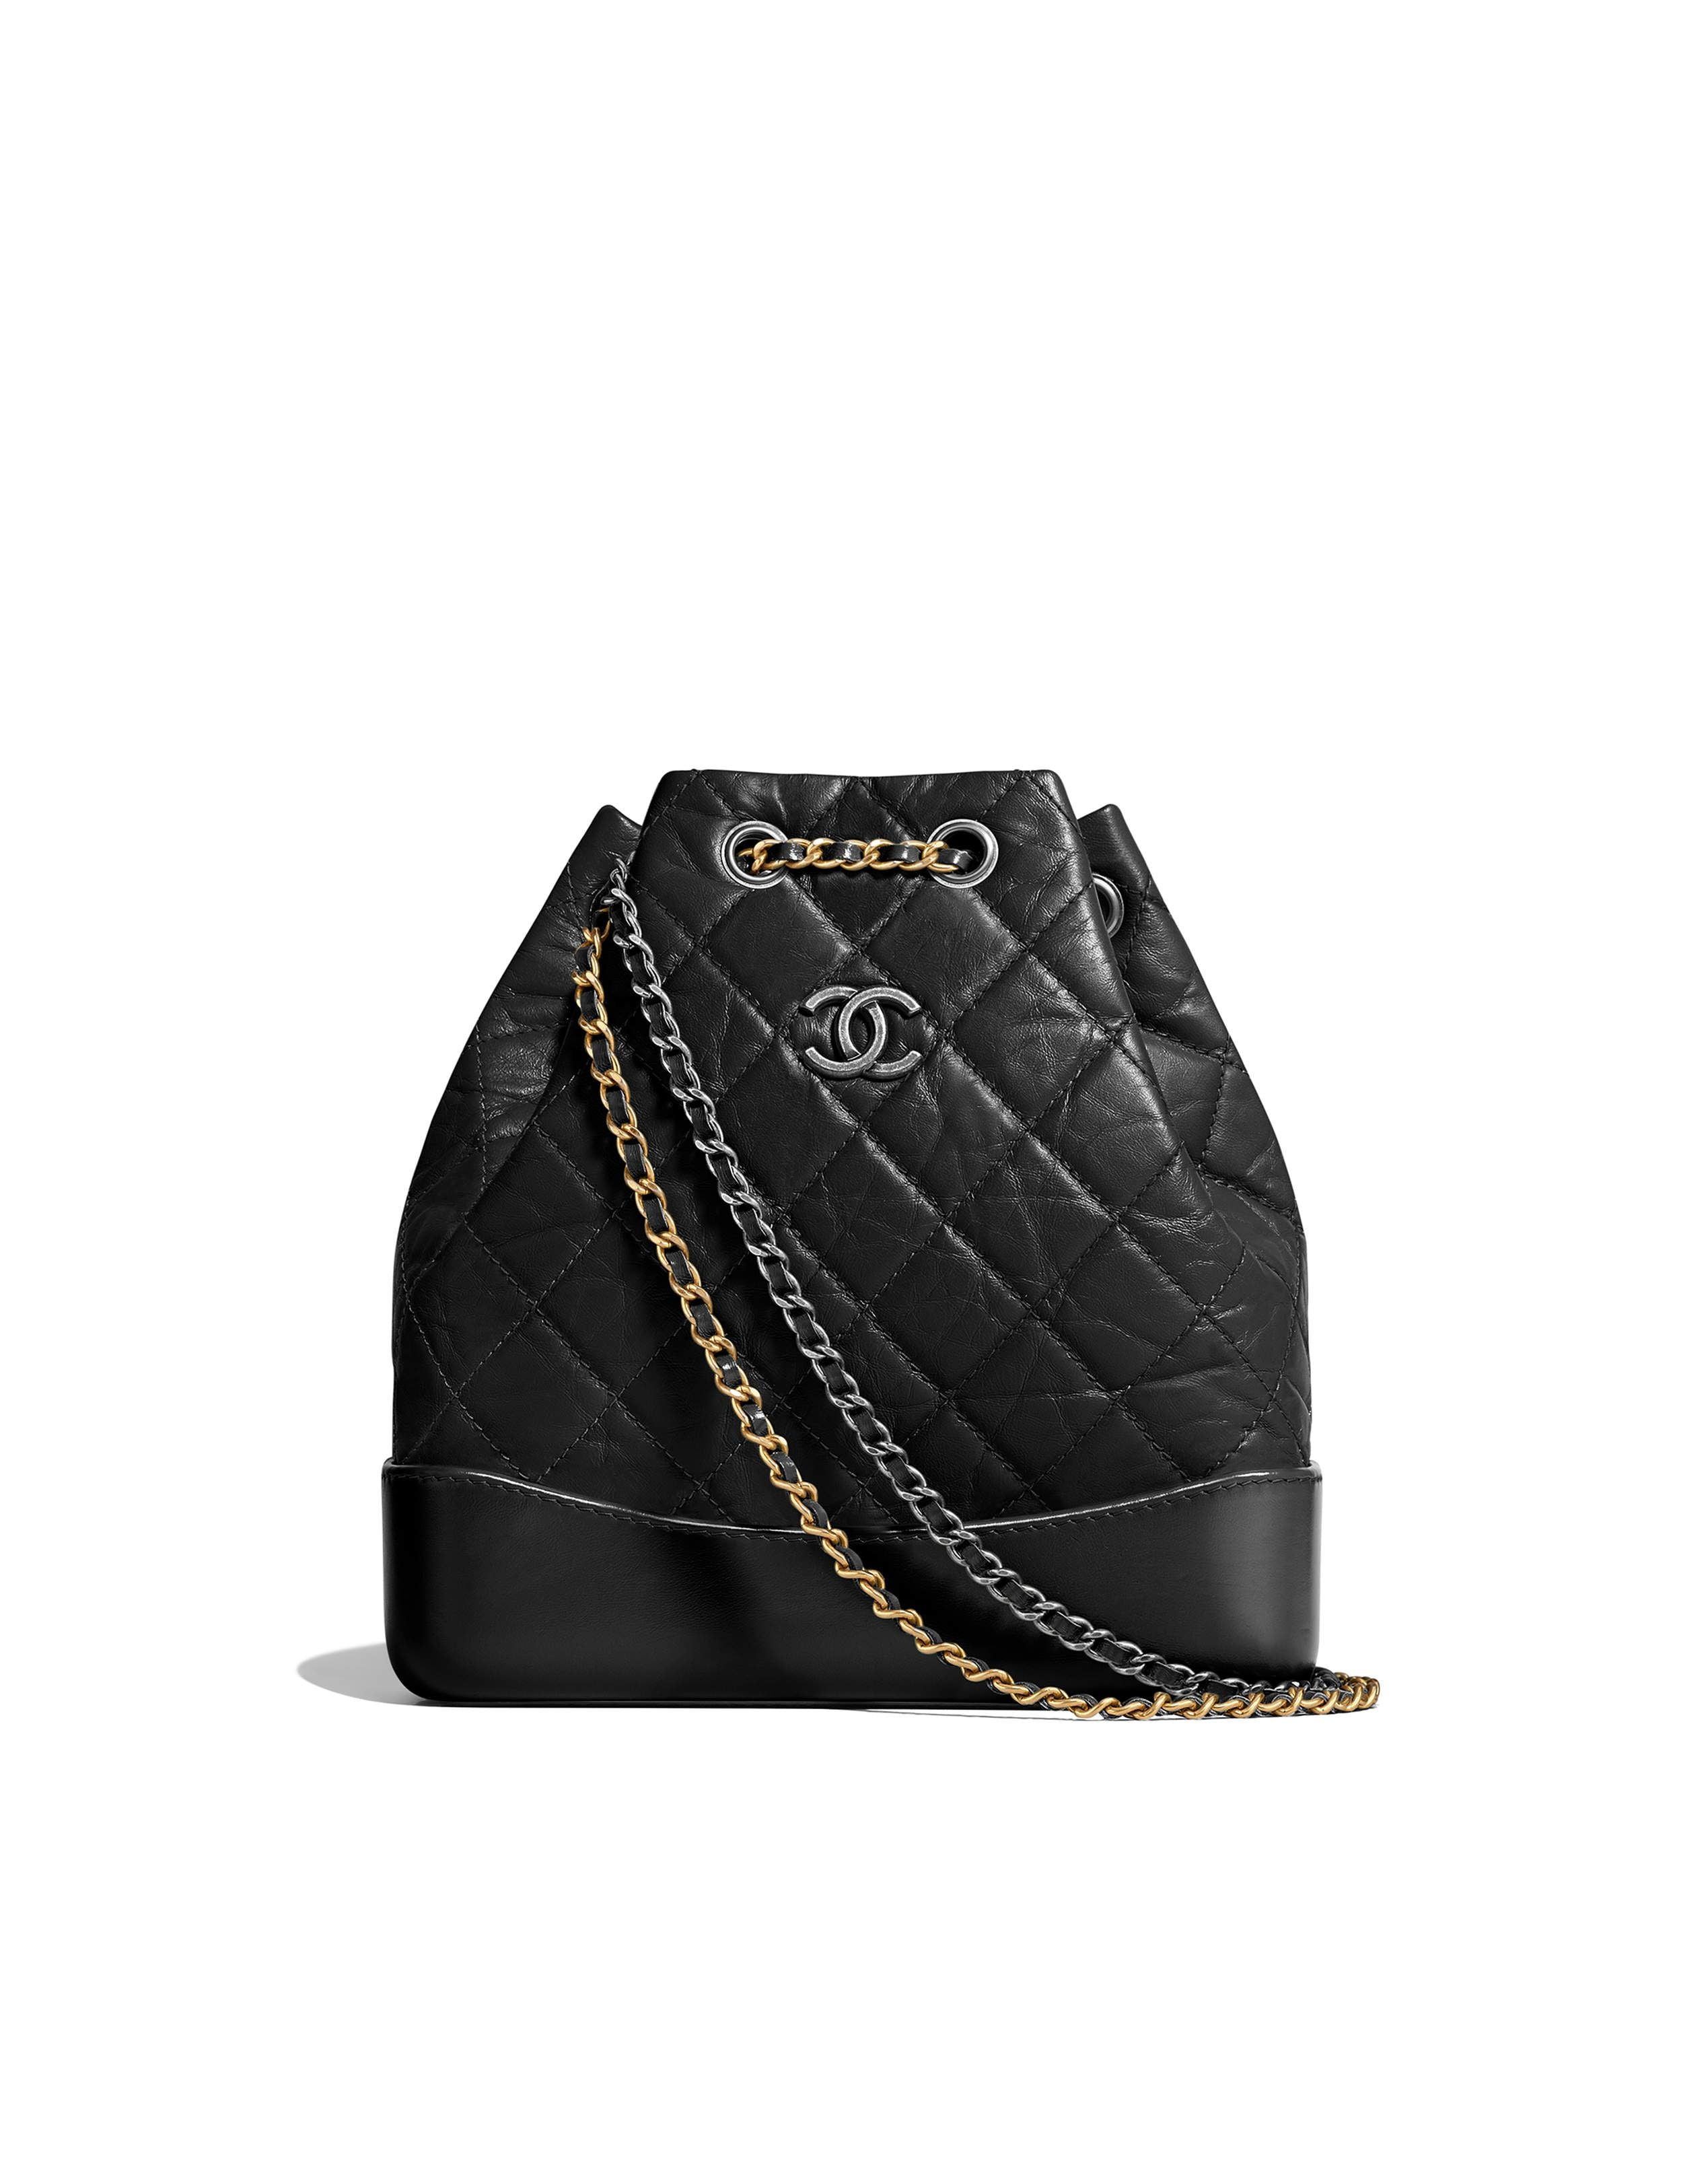 Chanel Small Gabrielle Backpack Black